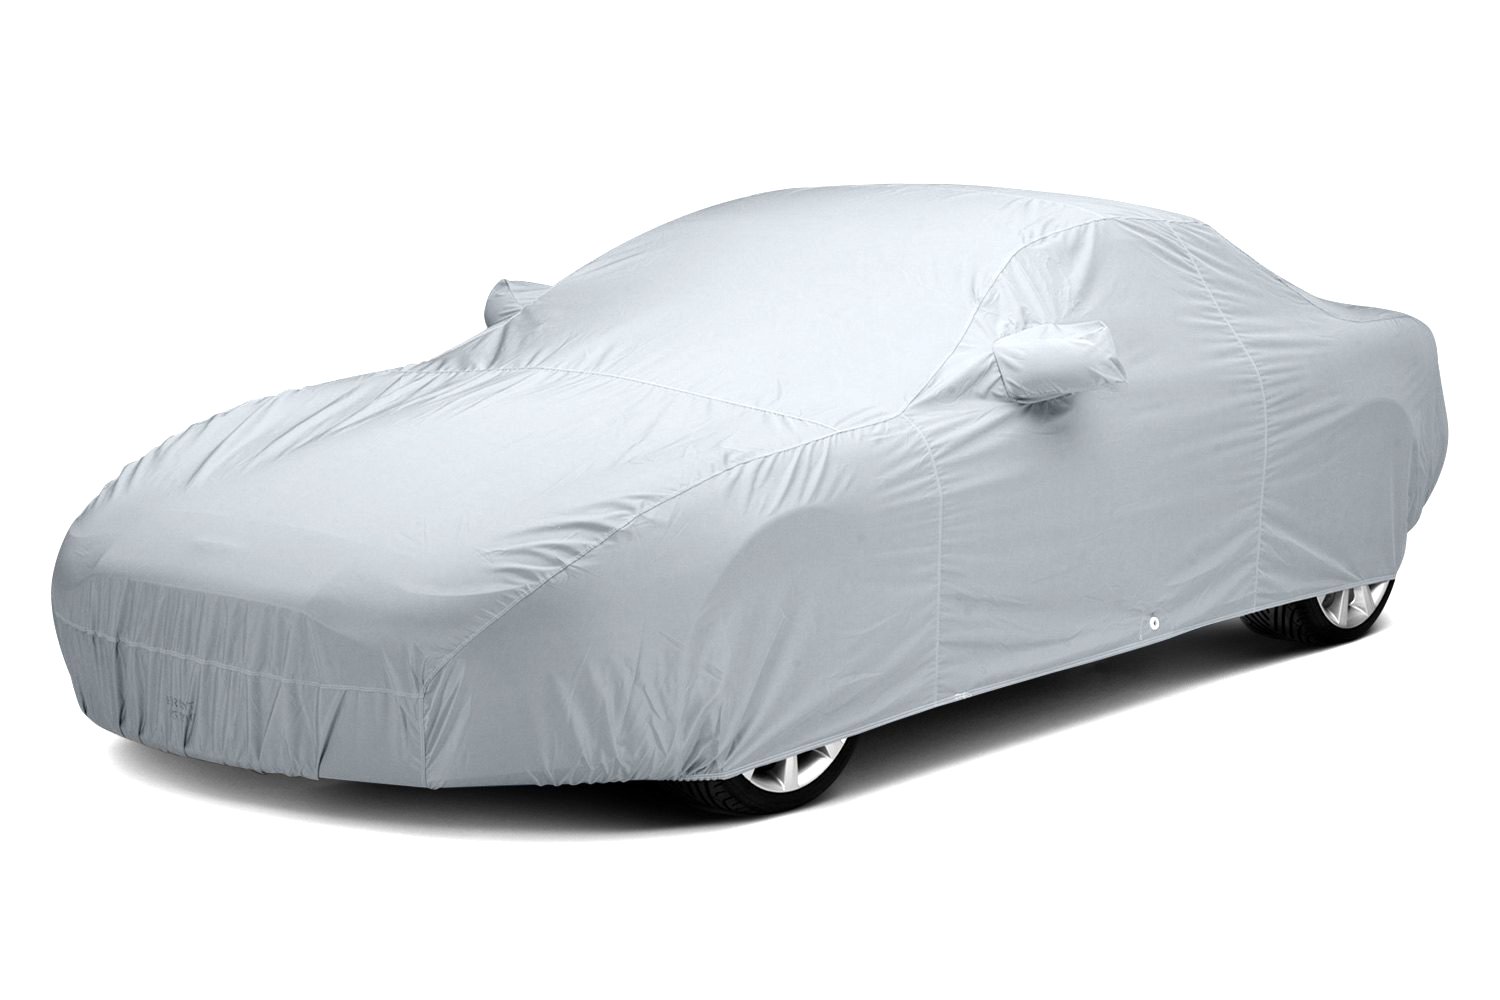 20102014 Mustang Covercraft Weathershield HP Car Cover